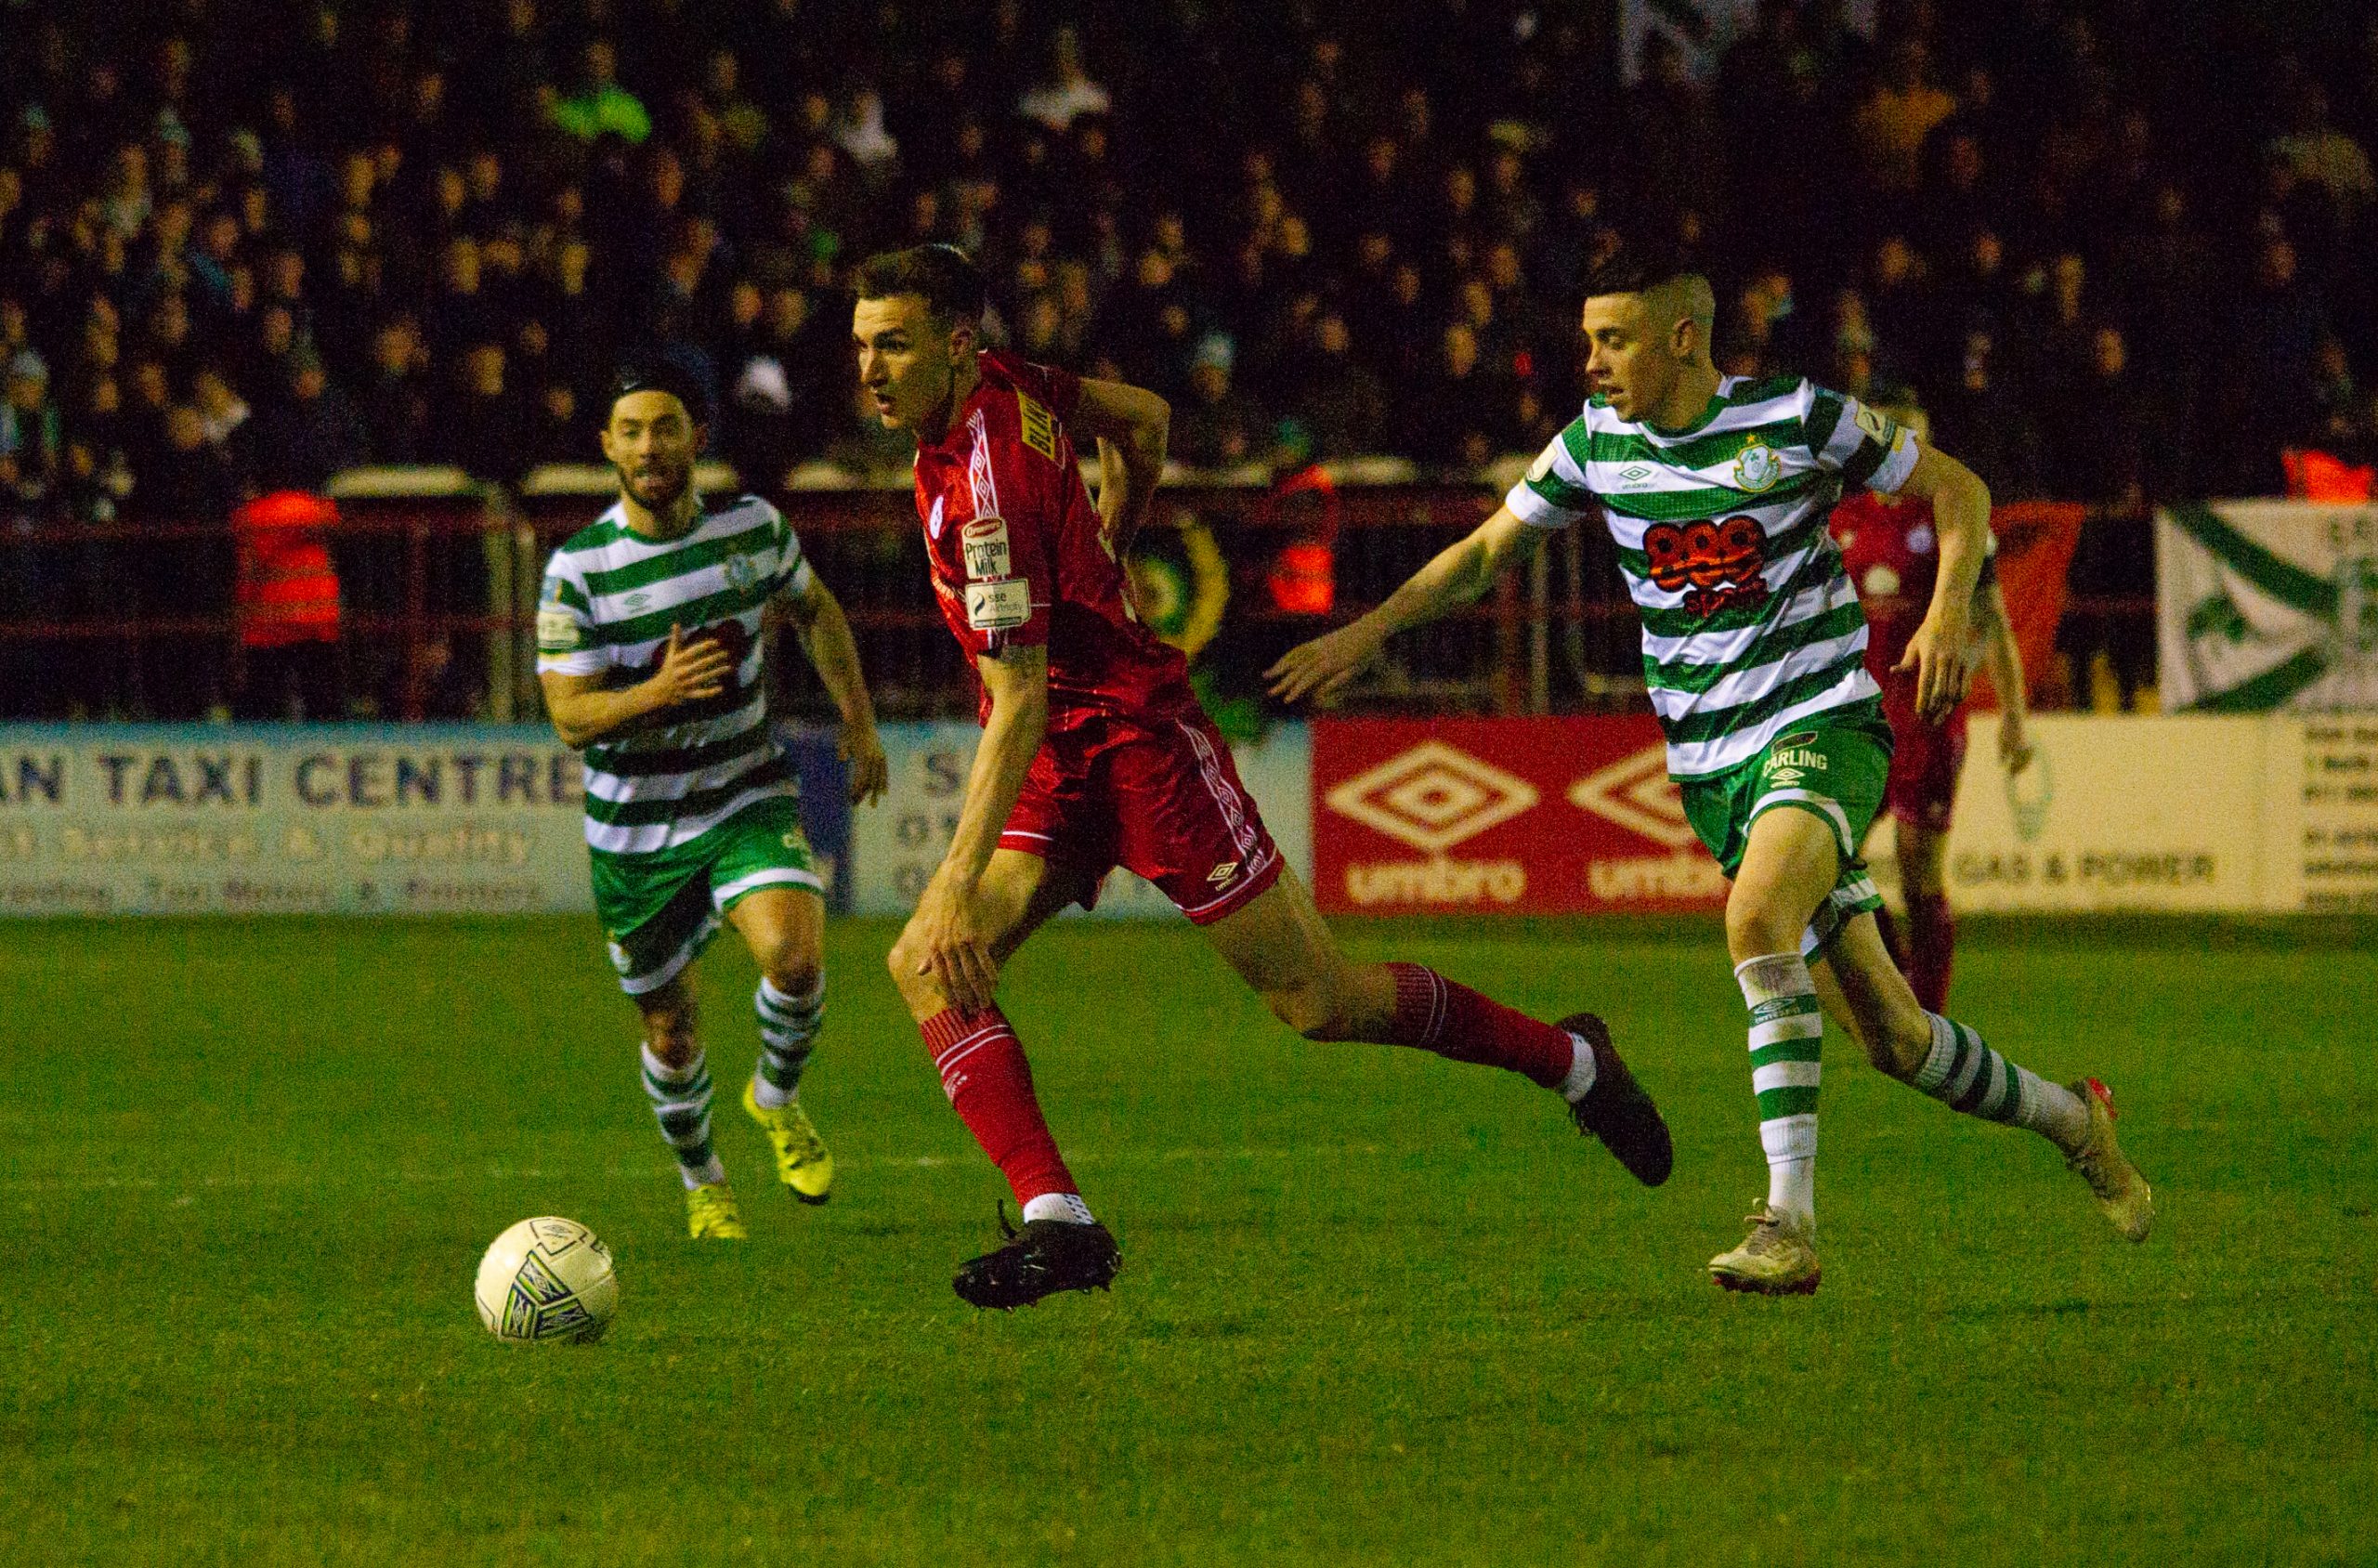 New dates set for two games against Shamrock Rovers